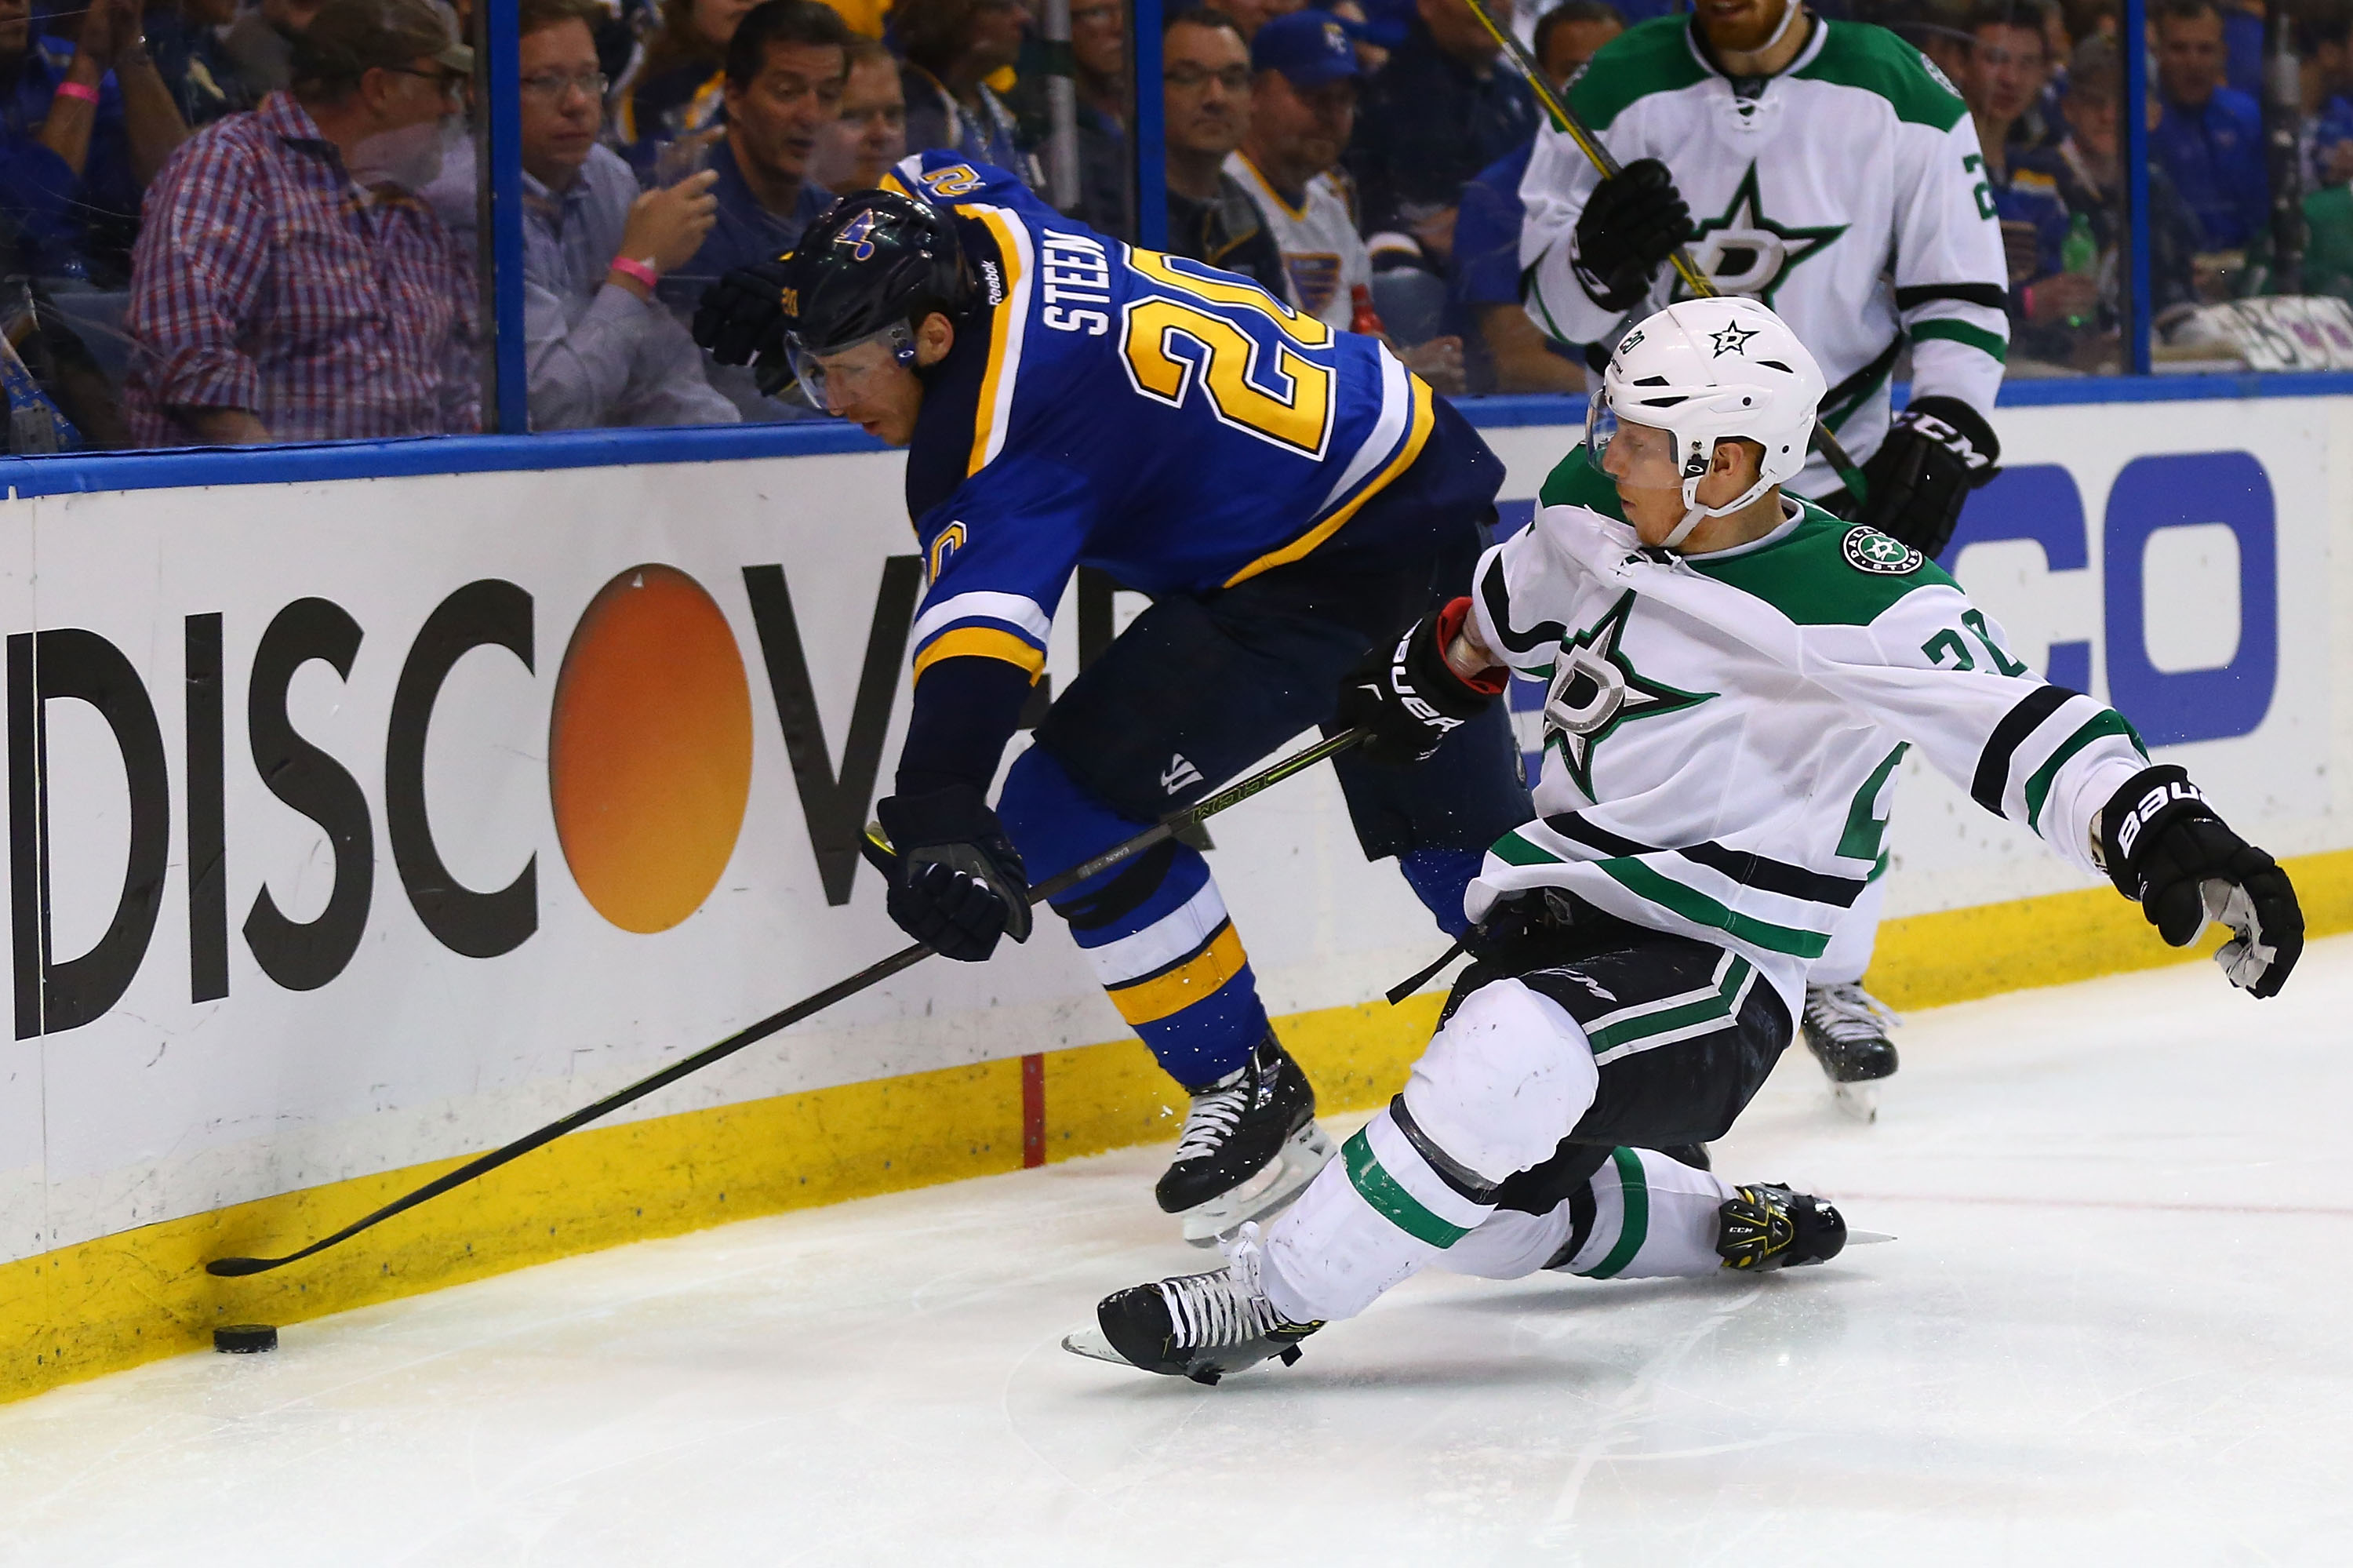 Blues vs. Stars Live Stream How to Watch Game 5 Online